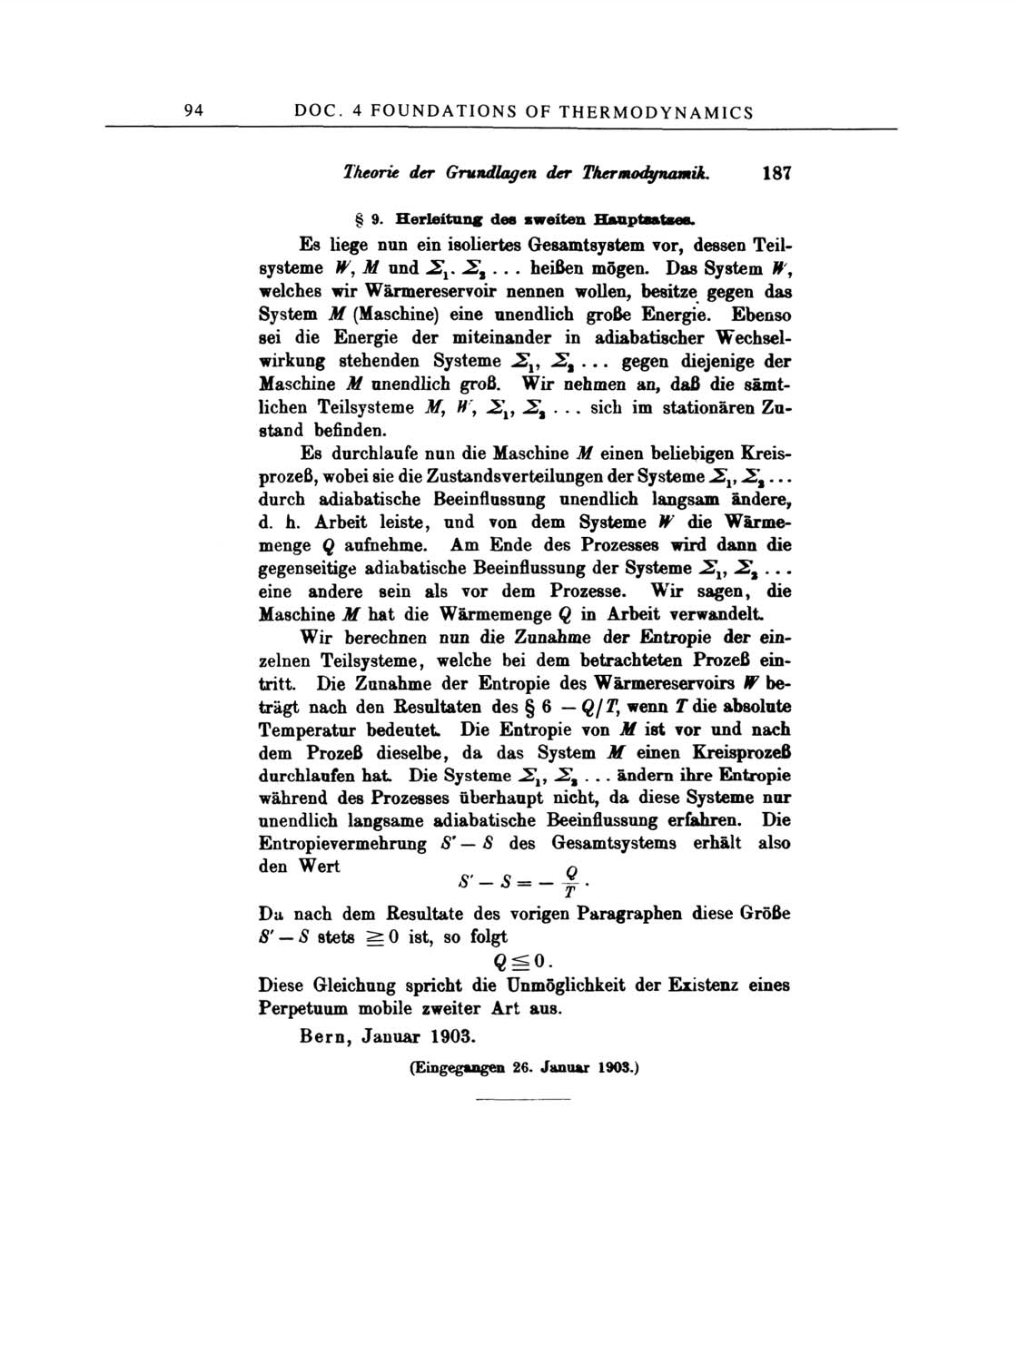 Volume 2: The Swiss Years: Writings, 1900-1909 page 94